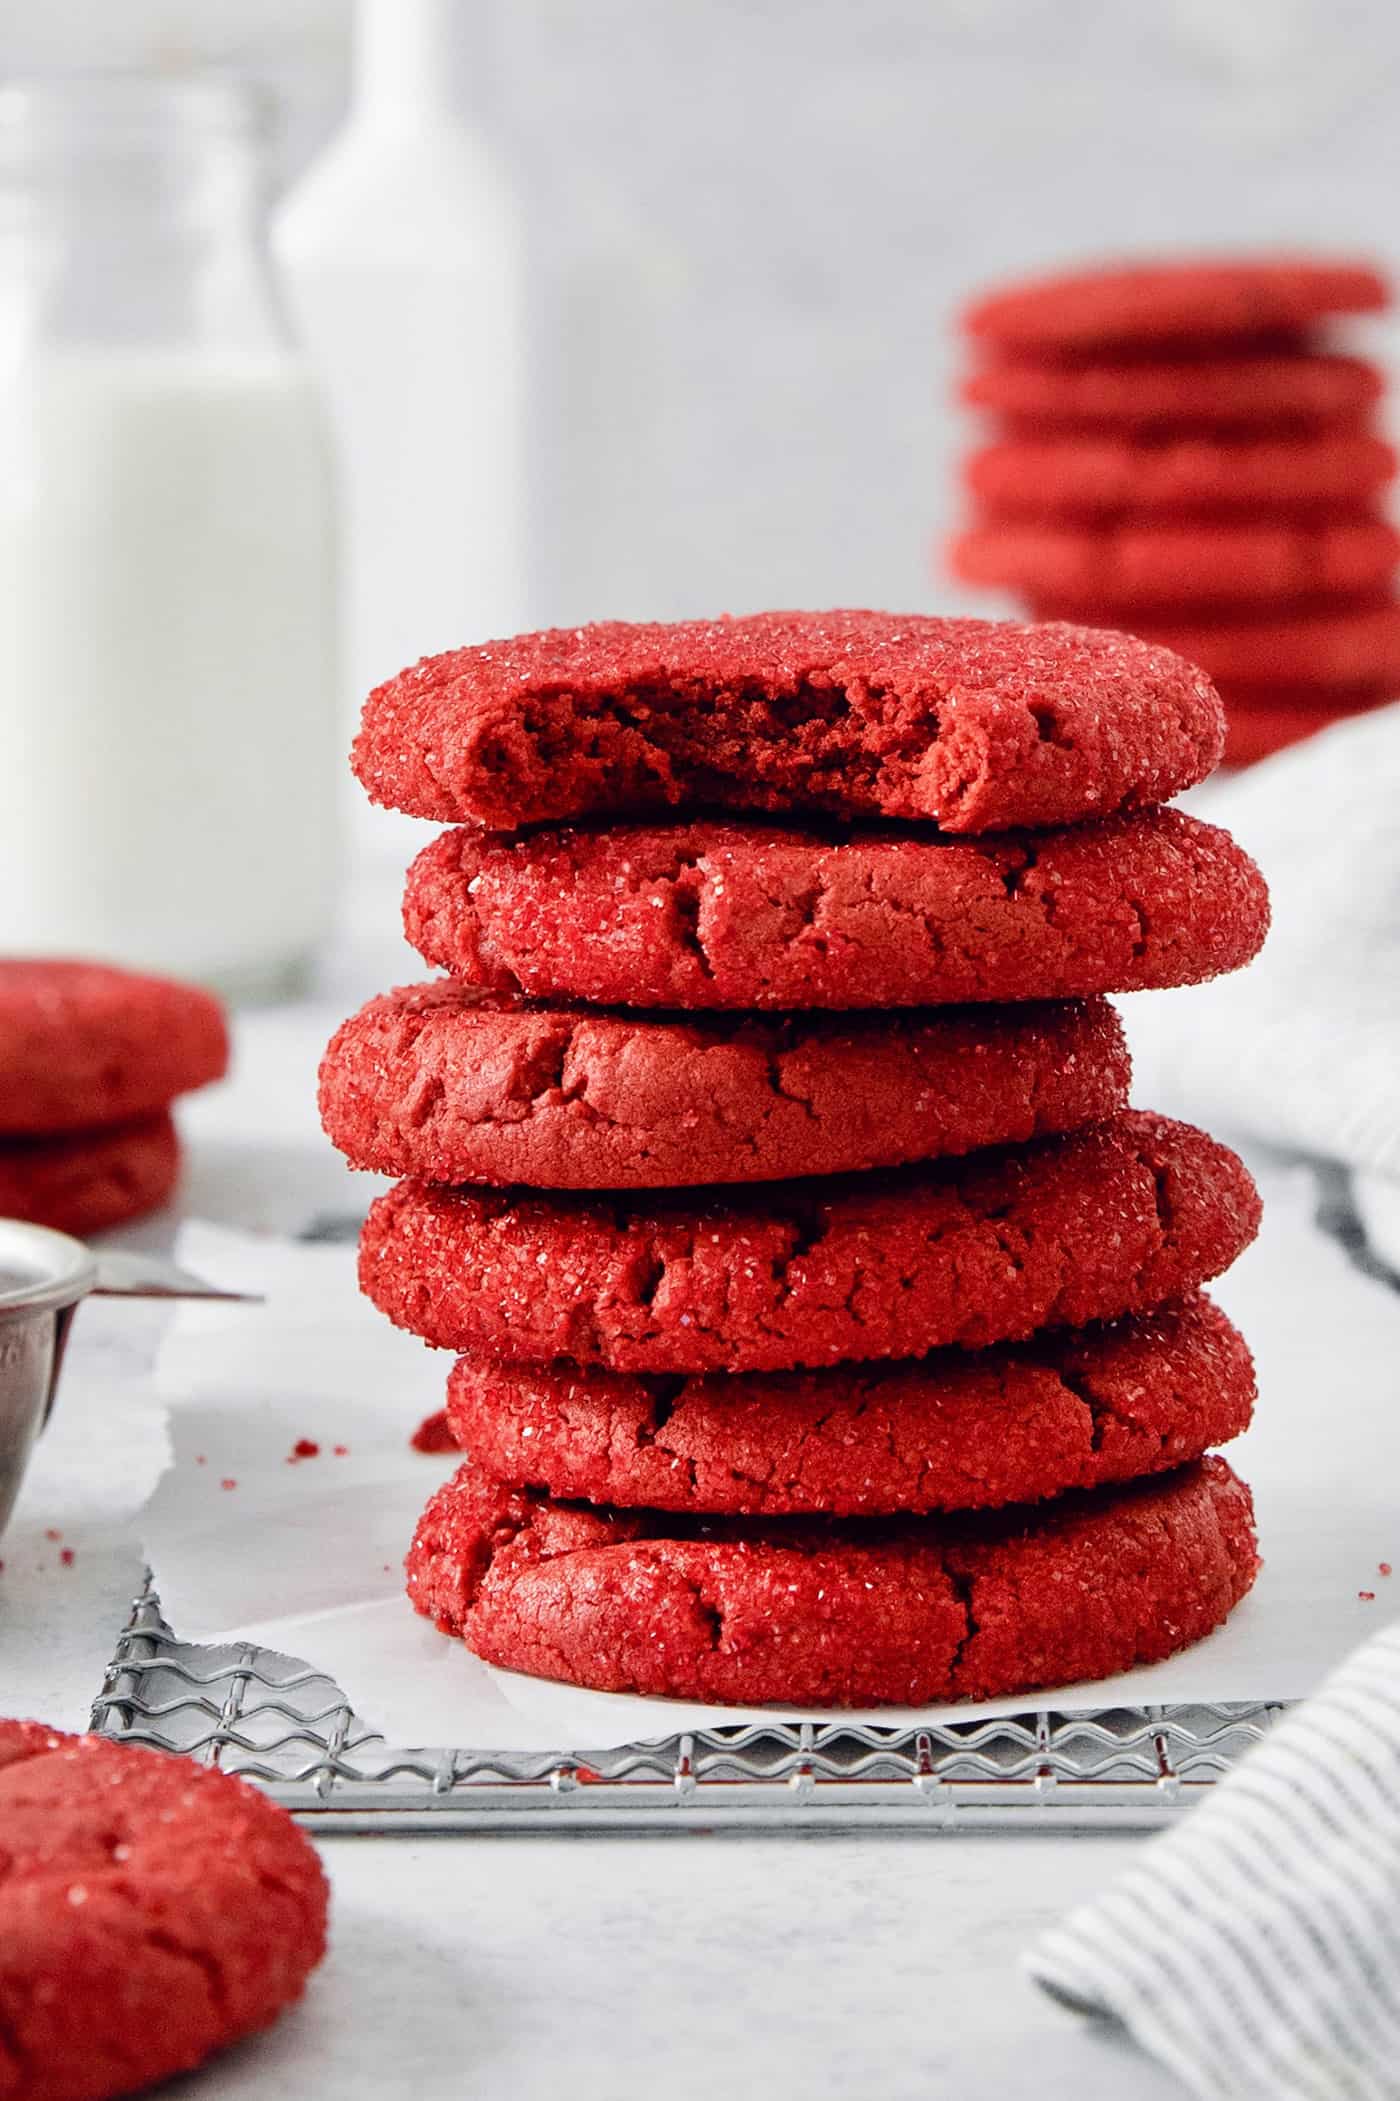 A stack of red velvet cookies, with the top cookie having a bite taken out.